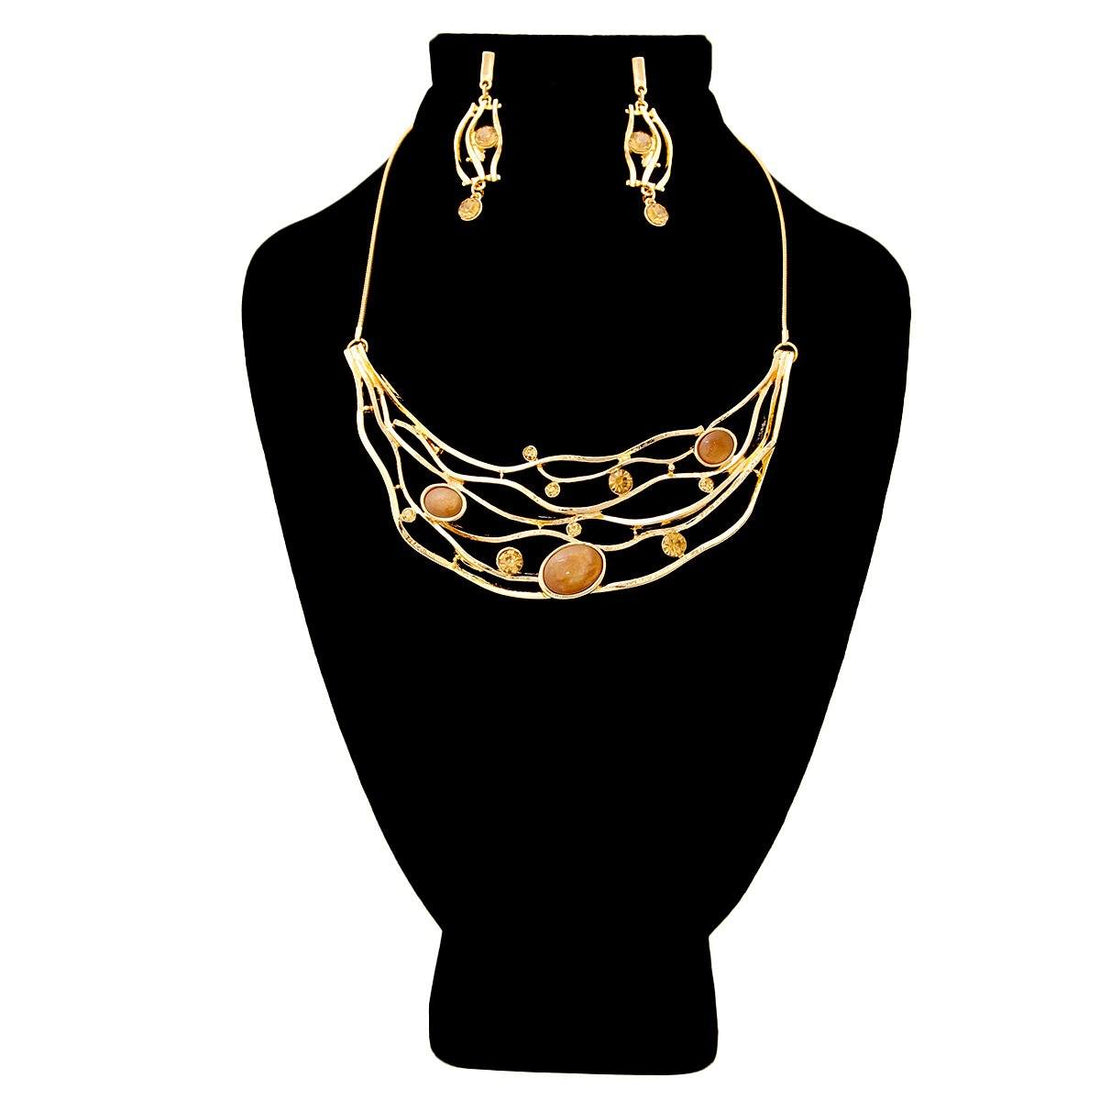 Gold Bib Necklace Set Featuring Brown Crystal and Topaz Rhinestone Detail